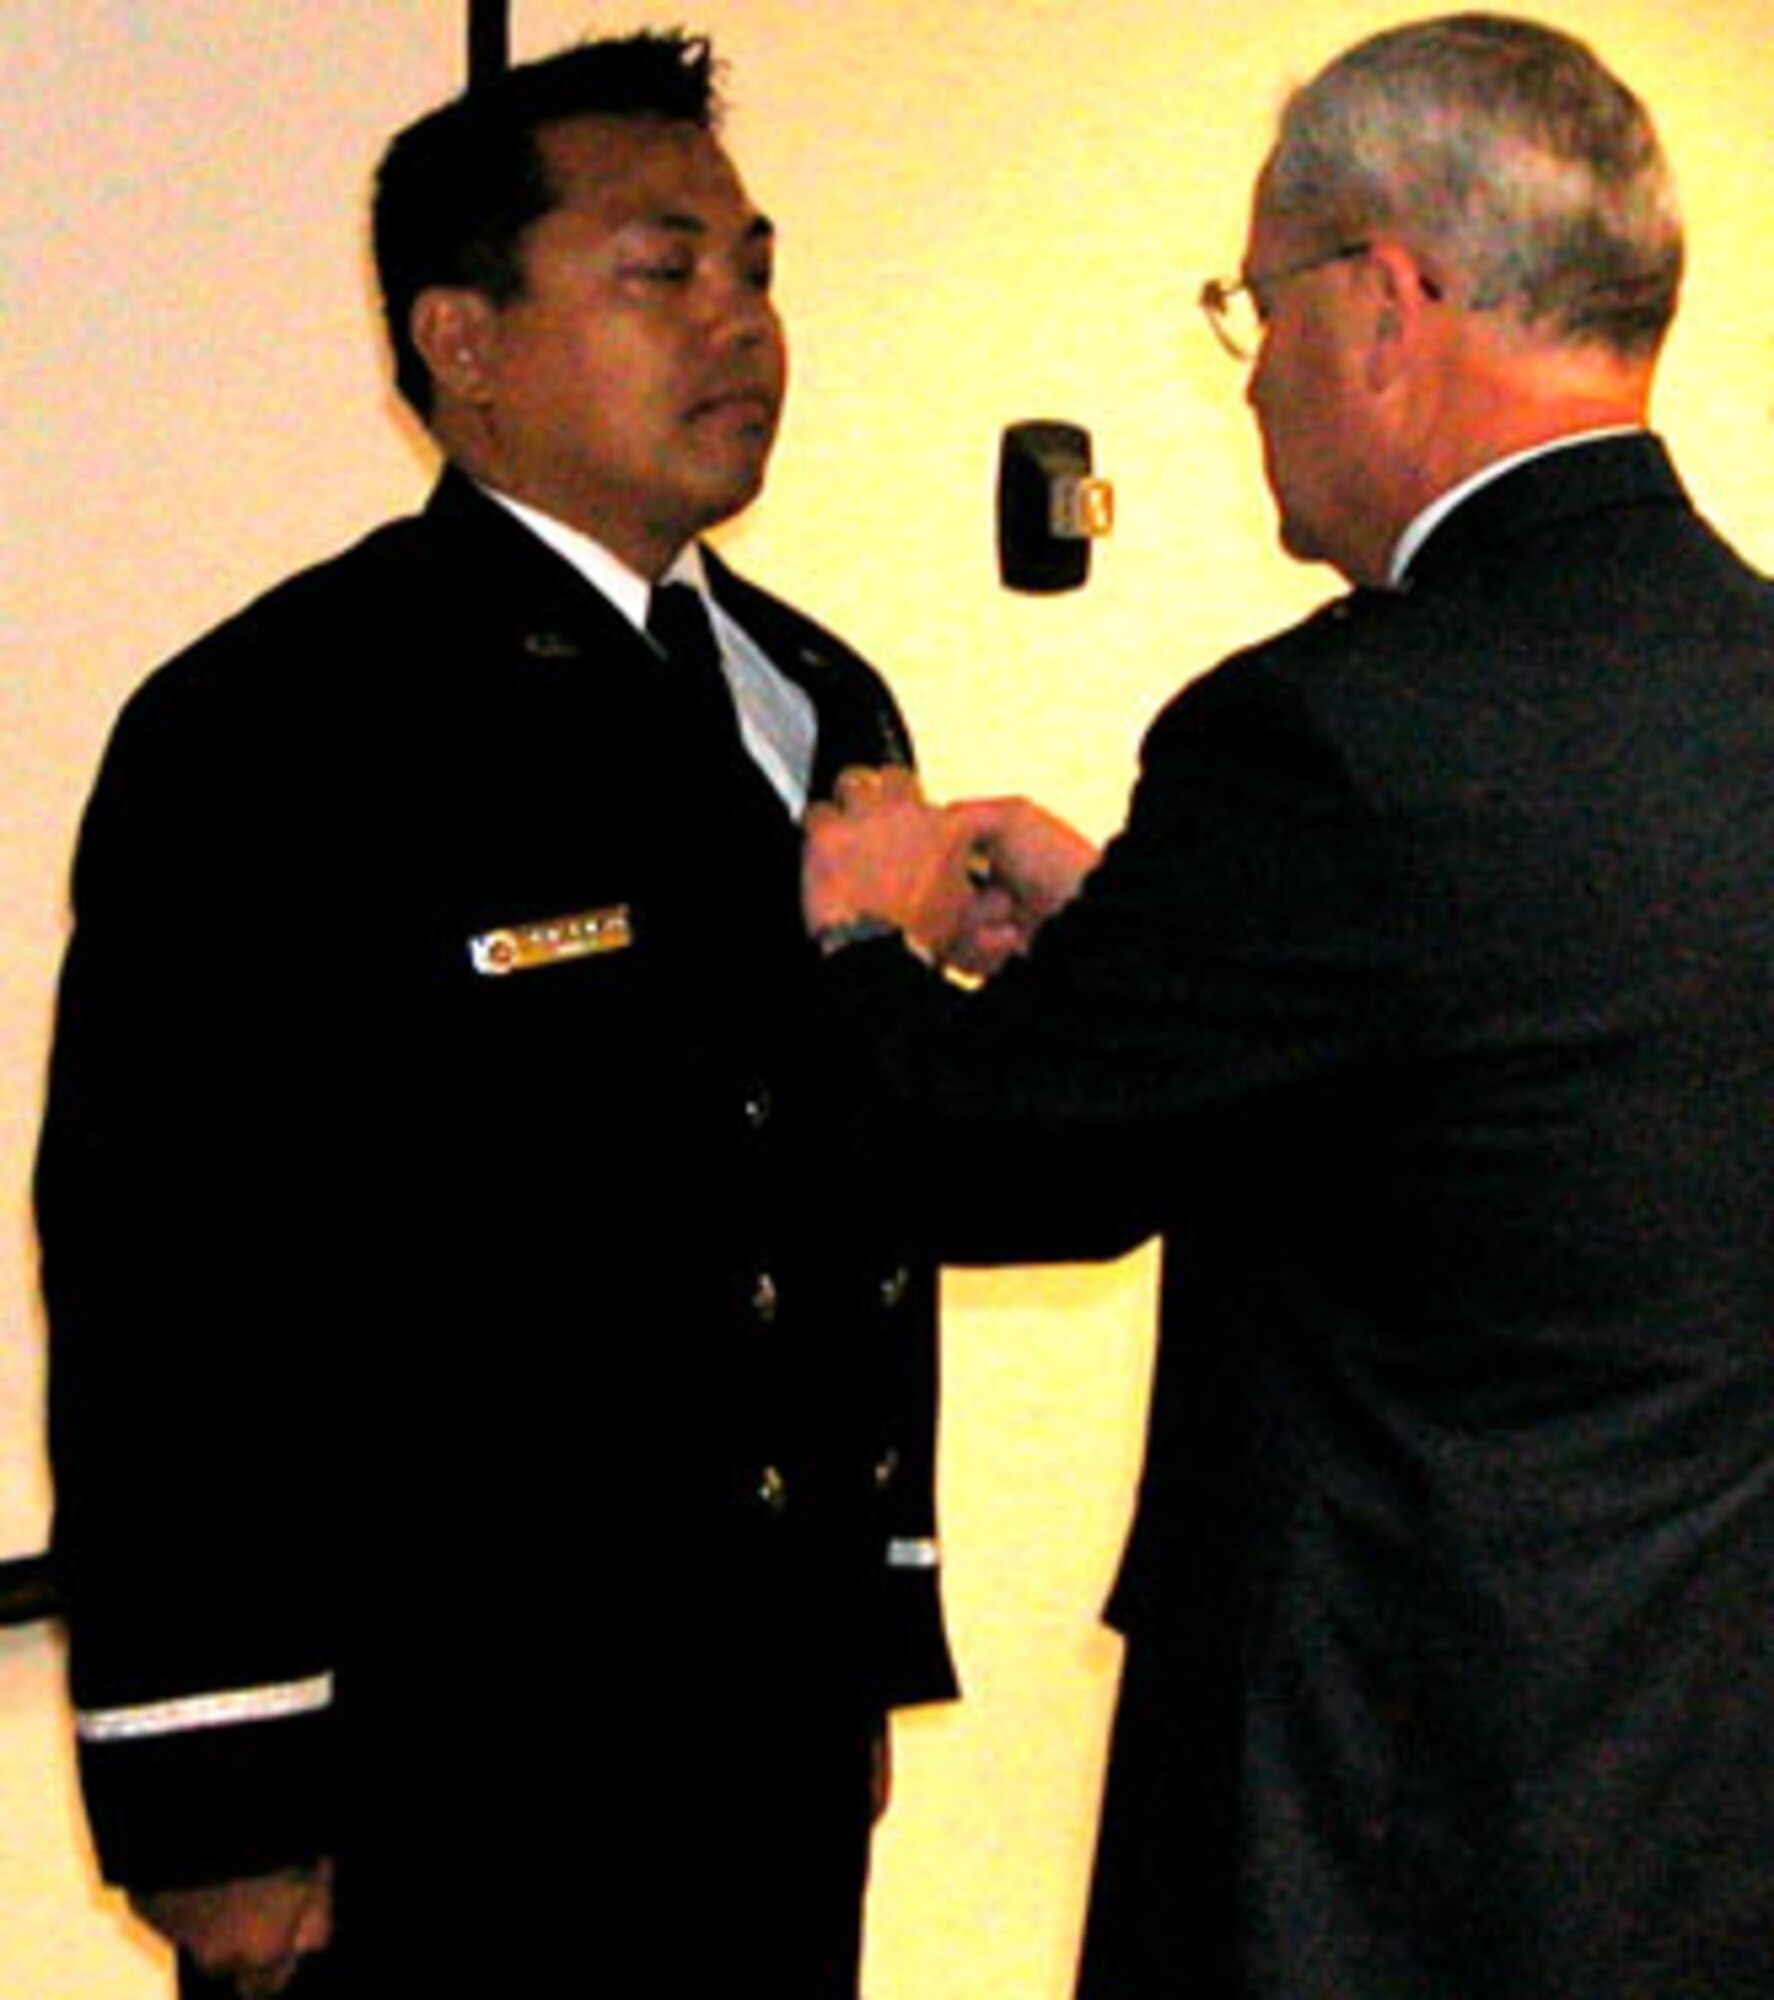 Mr. Roderick Rambayon, 452nd Air Mobility Wing Fire Department, March Air Reserve Base, is awarded the Air Force Civilian Achievement Medal and wing coin from Brig Gen James L. Melin, 452 AMW commander, for exceptional performance on March Brush Engine 10 during the Esperanza fire on 26 October 2006.  Five U.S. Forest Service firefighters died battling an arson wildfire where they were overcome by 90-foot-tall walls of flame advancing at 40 mph.
Mr. Rambayon provided medical treatment and sustained one of the firefighter’s, Pablo Cerda, life in an effort to get him to the hospital; he died five days later from burns to 90 percent of his body.  The five firefighters were trapped in a burnover which can occur when an advancing fire driven by high winds jumps a protective line and traps firefighters in its path. The trapped firefighters did not have time to don their protective gear.  (U.S. Air Force photos by LaGina Jackson)
